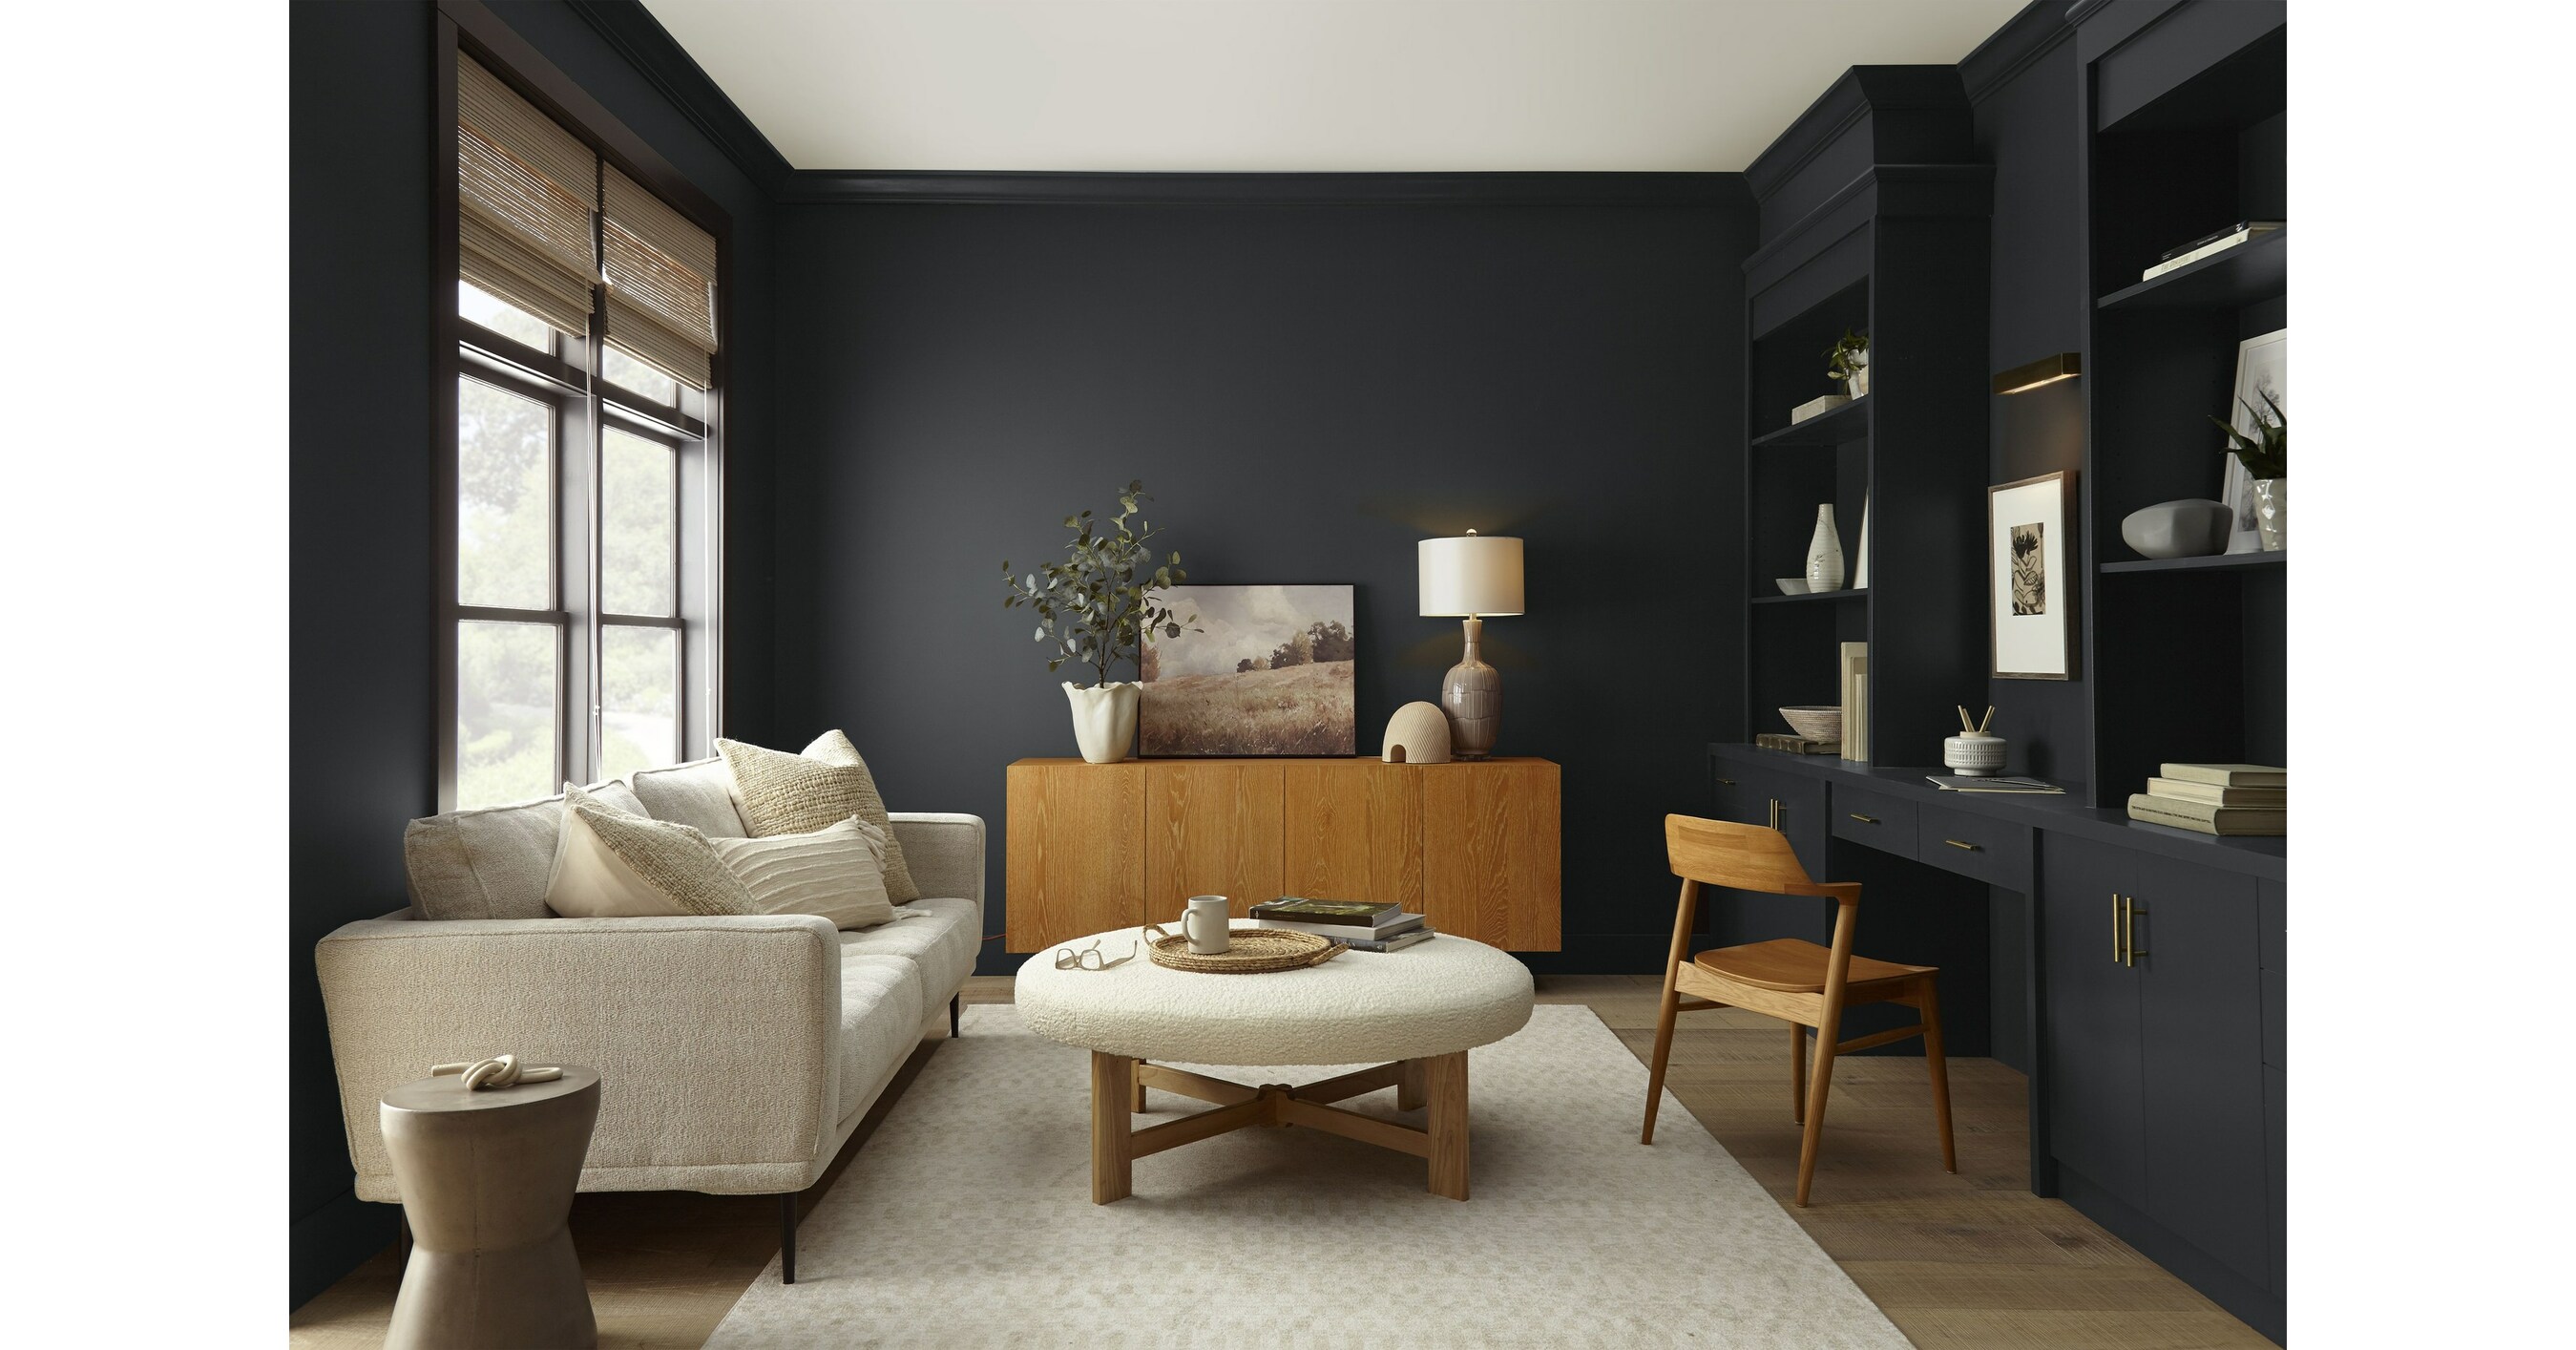 Behr Paint Company Announces Its 2024 Color of the Year, "Cracked